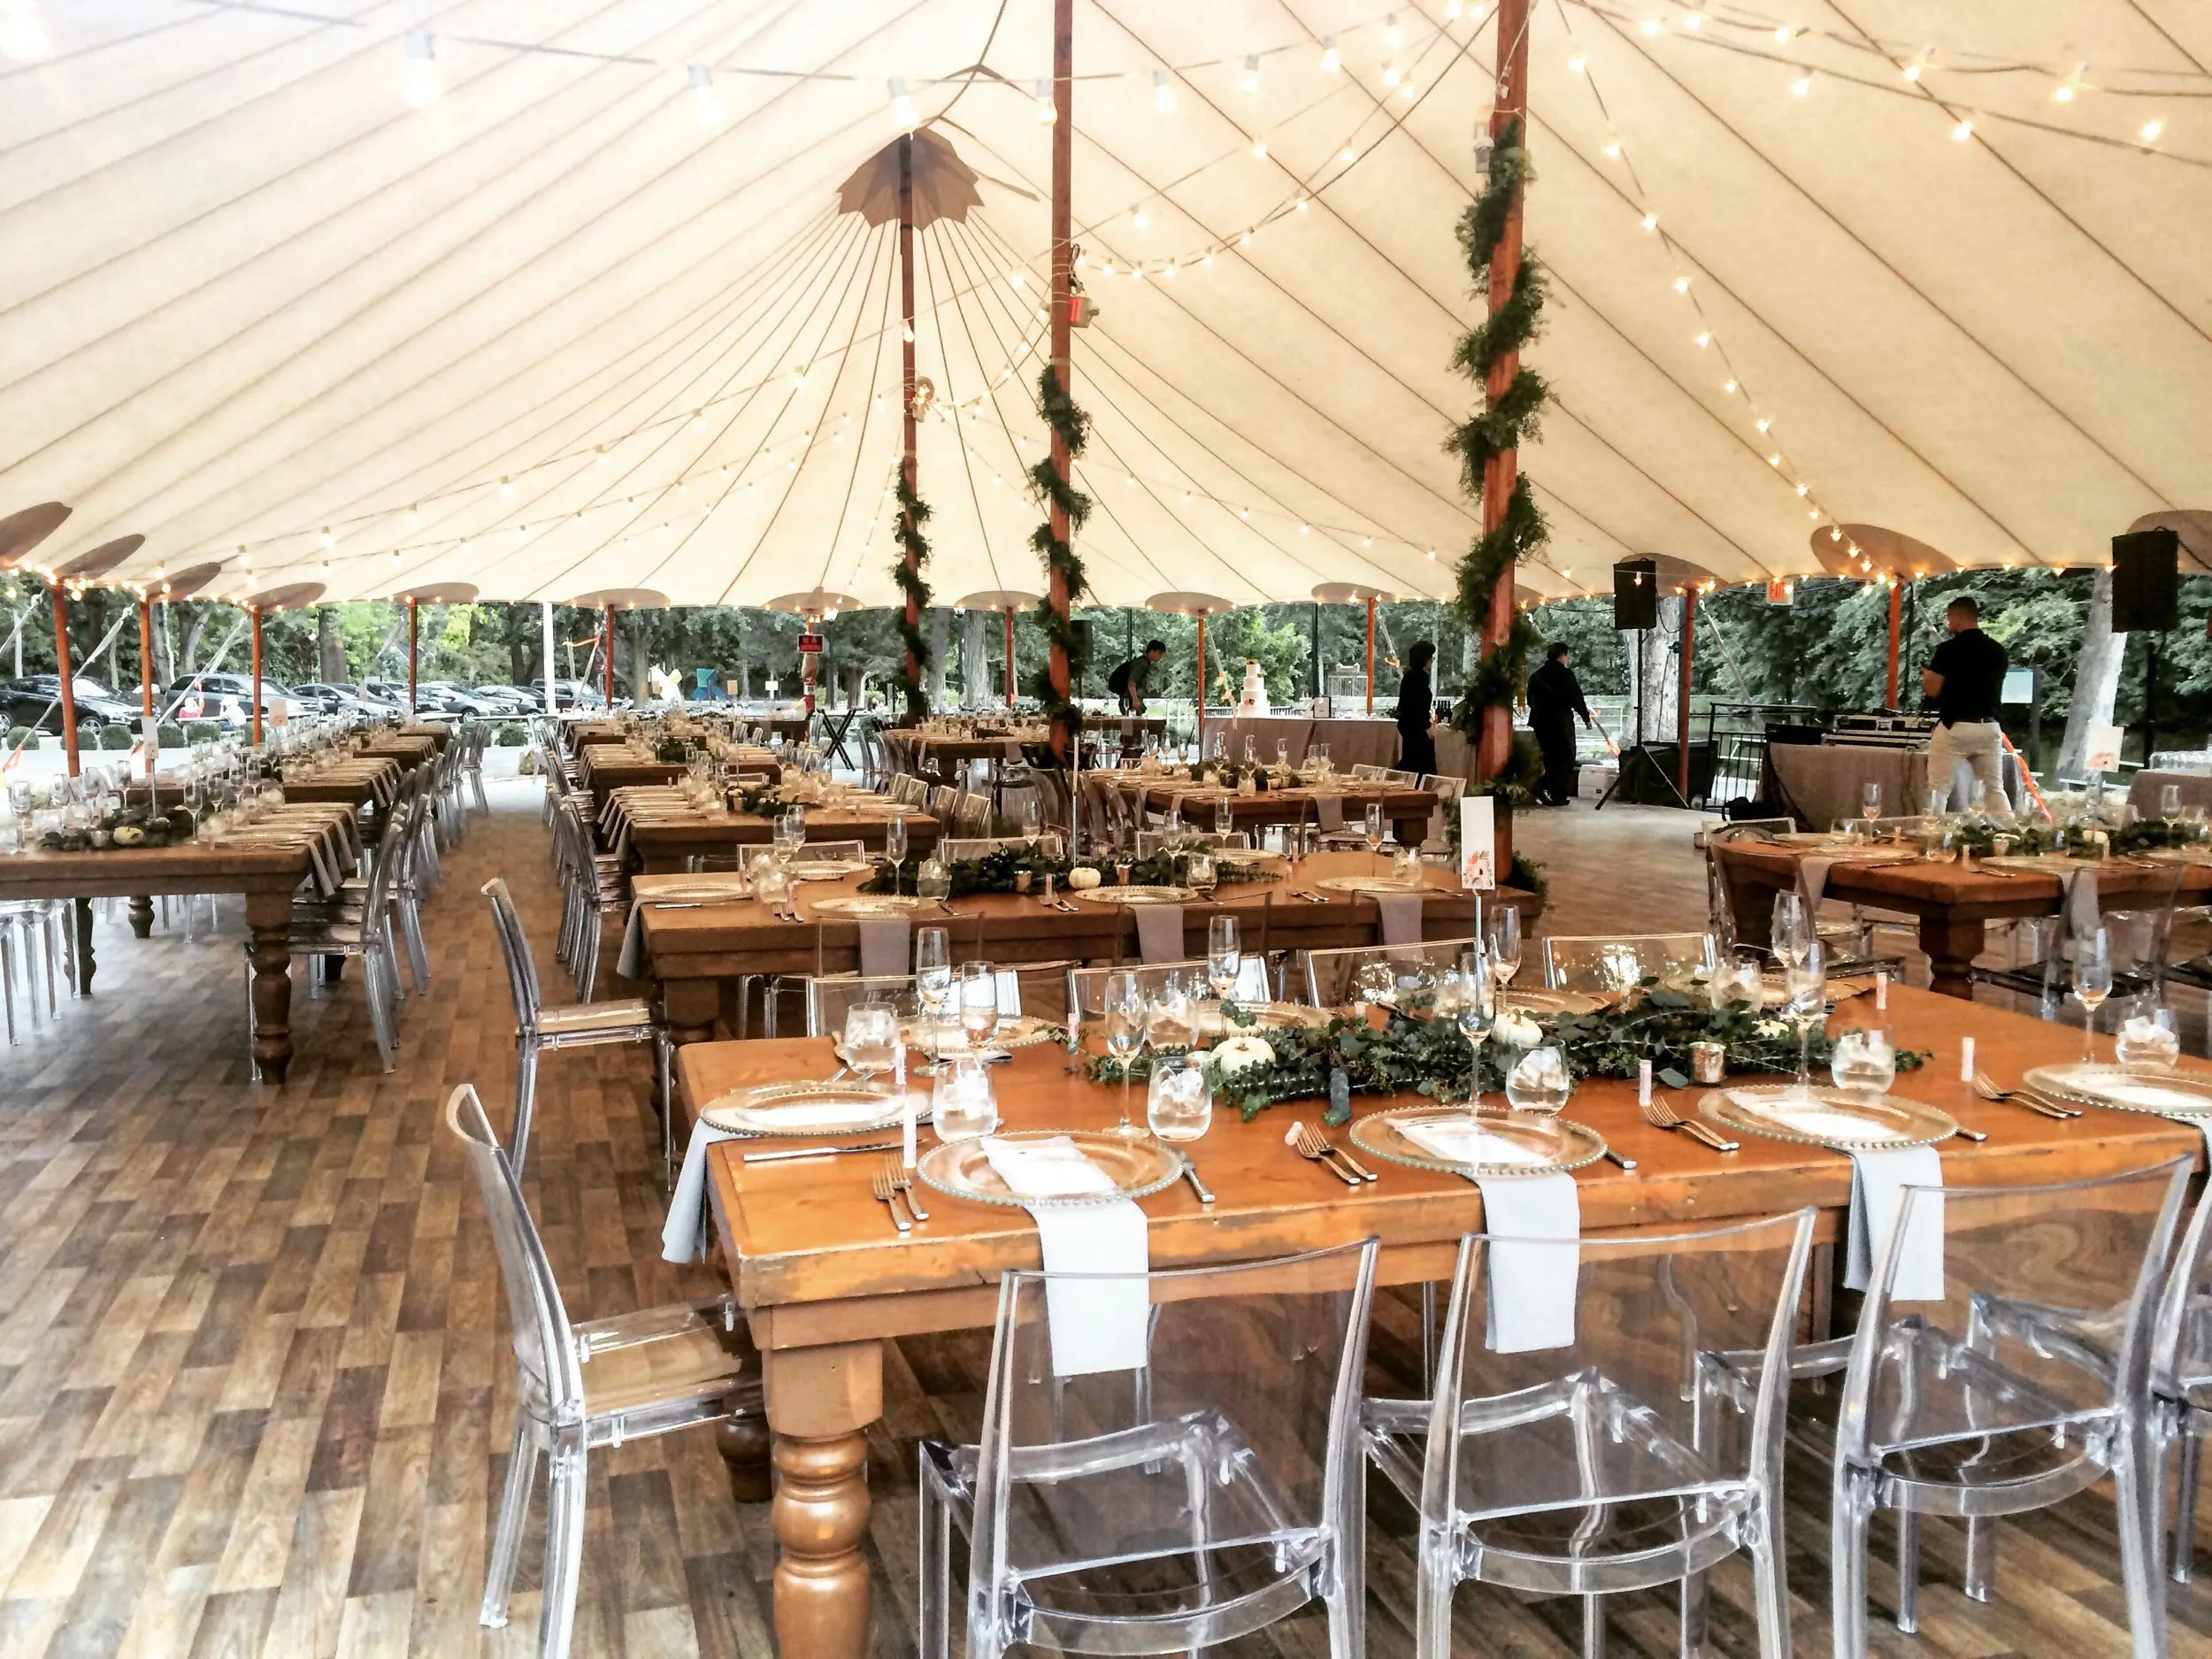 Meadow Tent Farm Tables - David's Soundview Catering